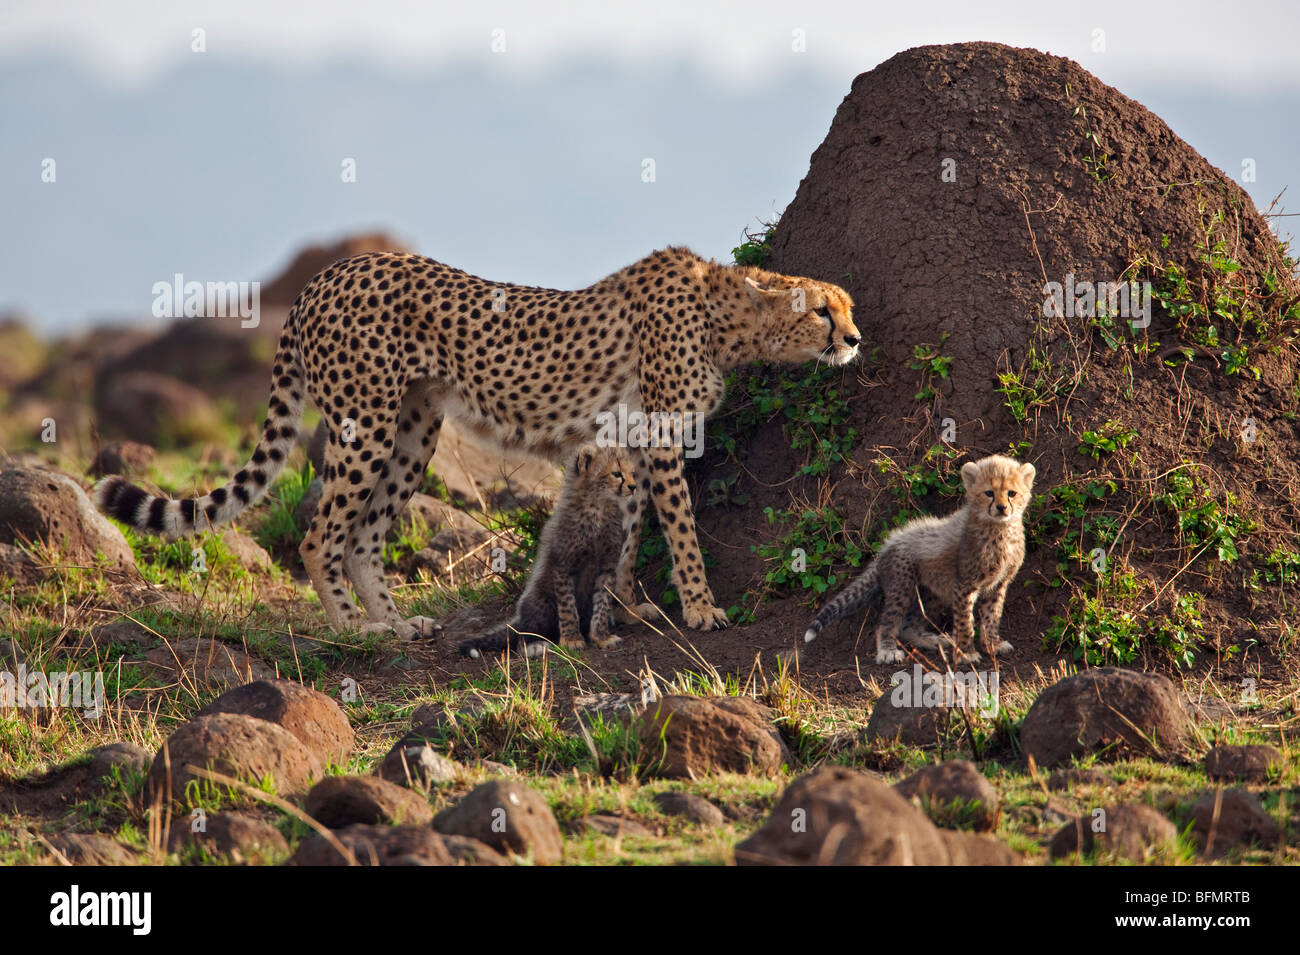 Kenya. A cheetah and her one-month-old cubs beside a termite mound in Masai Mara National Reserve. Stock Photo